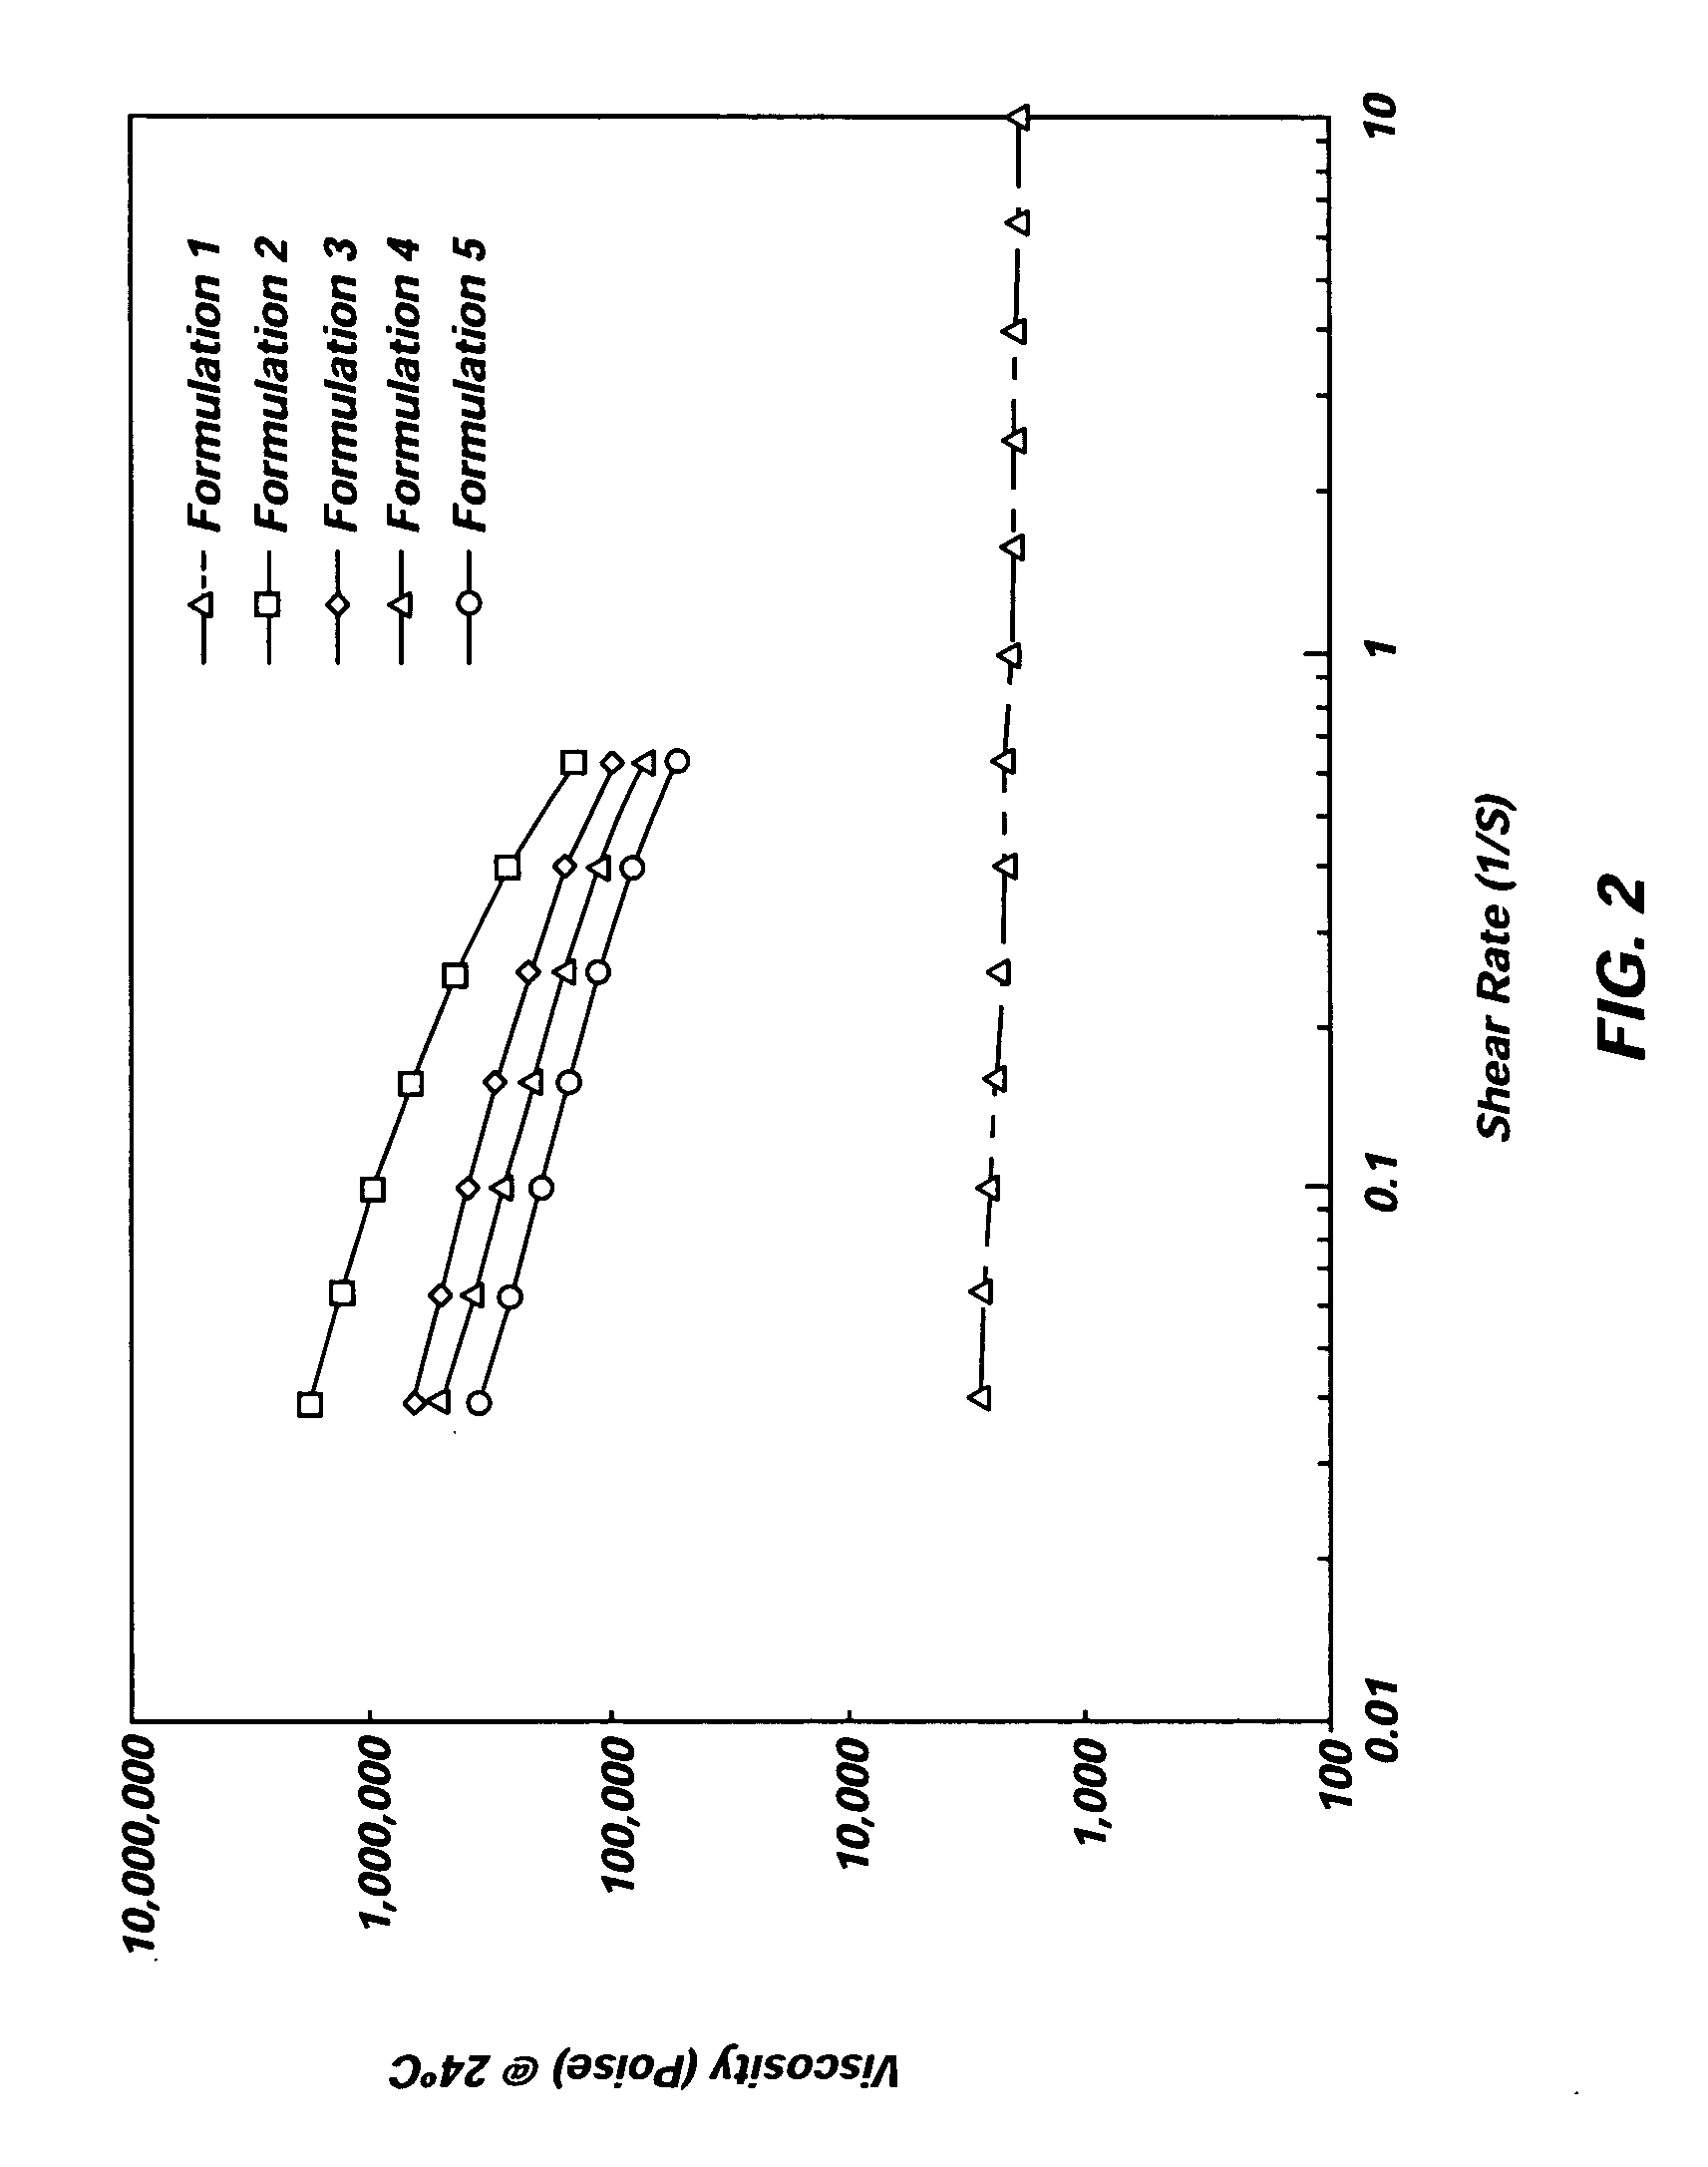 Implantable elastomeric depot compositions and uses thereof